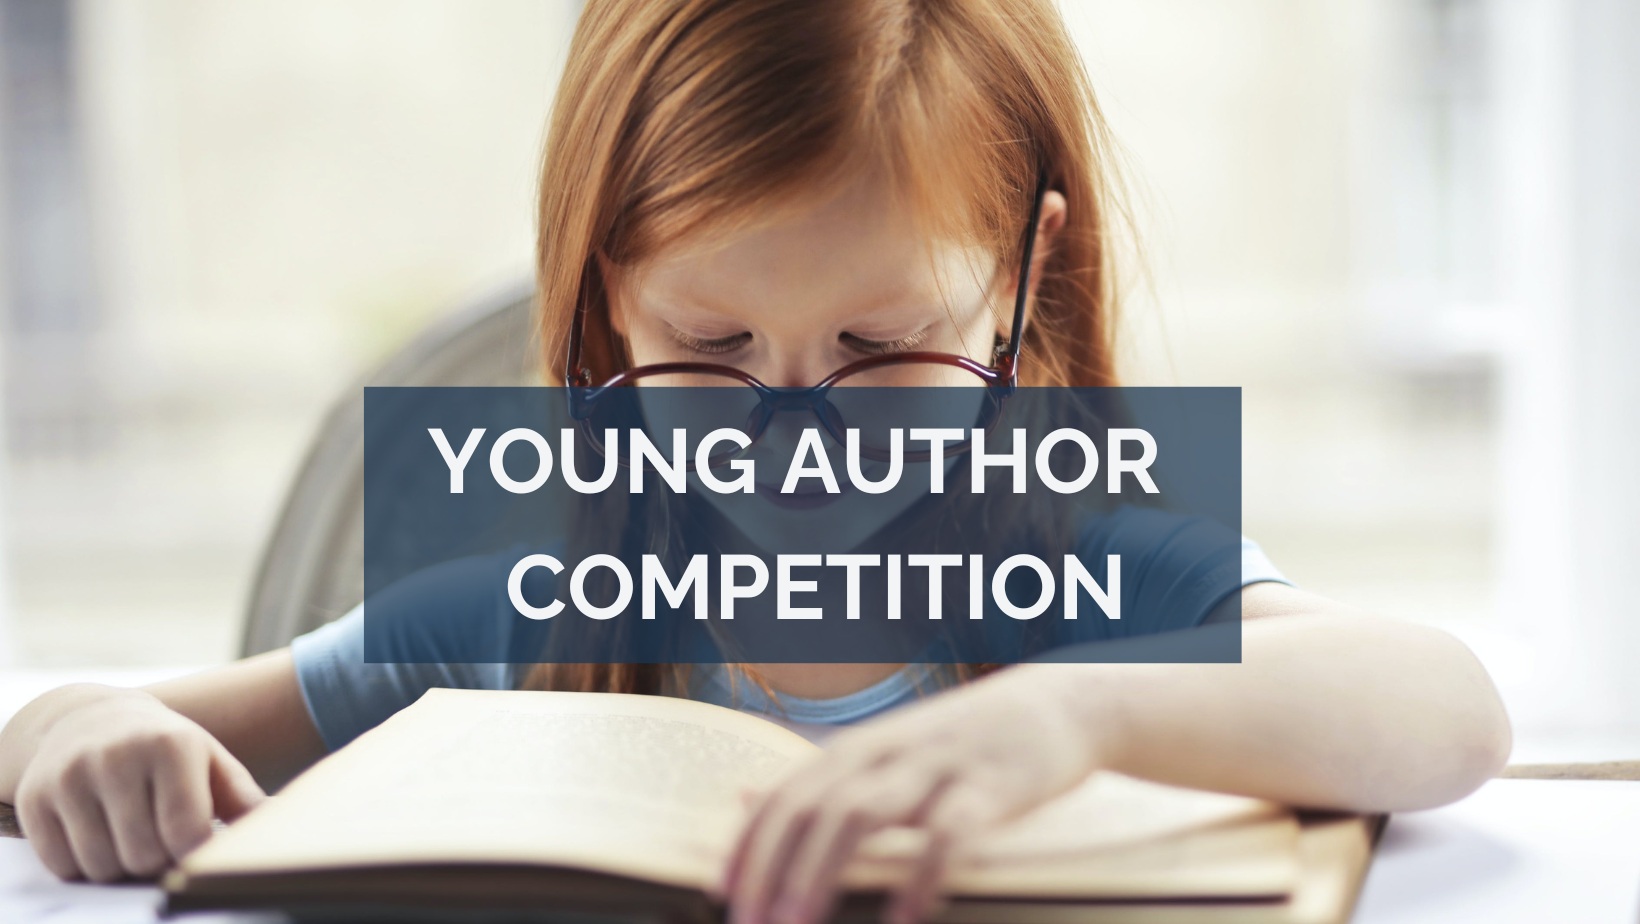 YOUNG AUTHOR COMPEITION